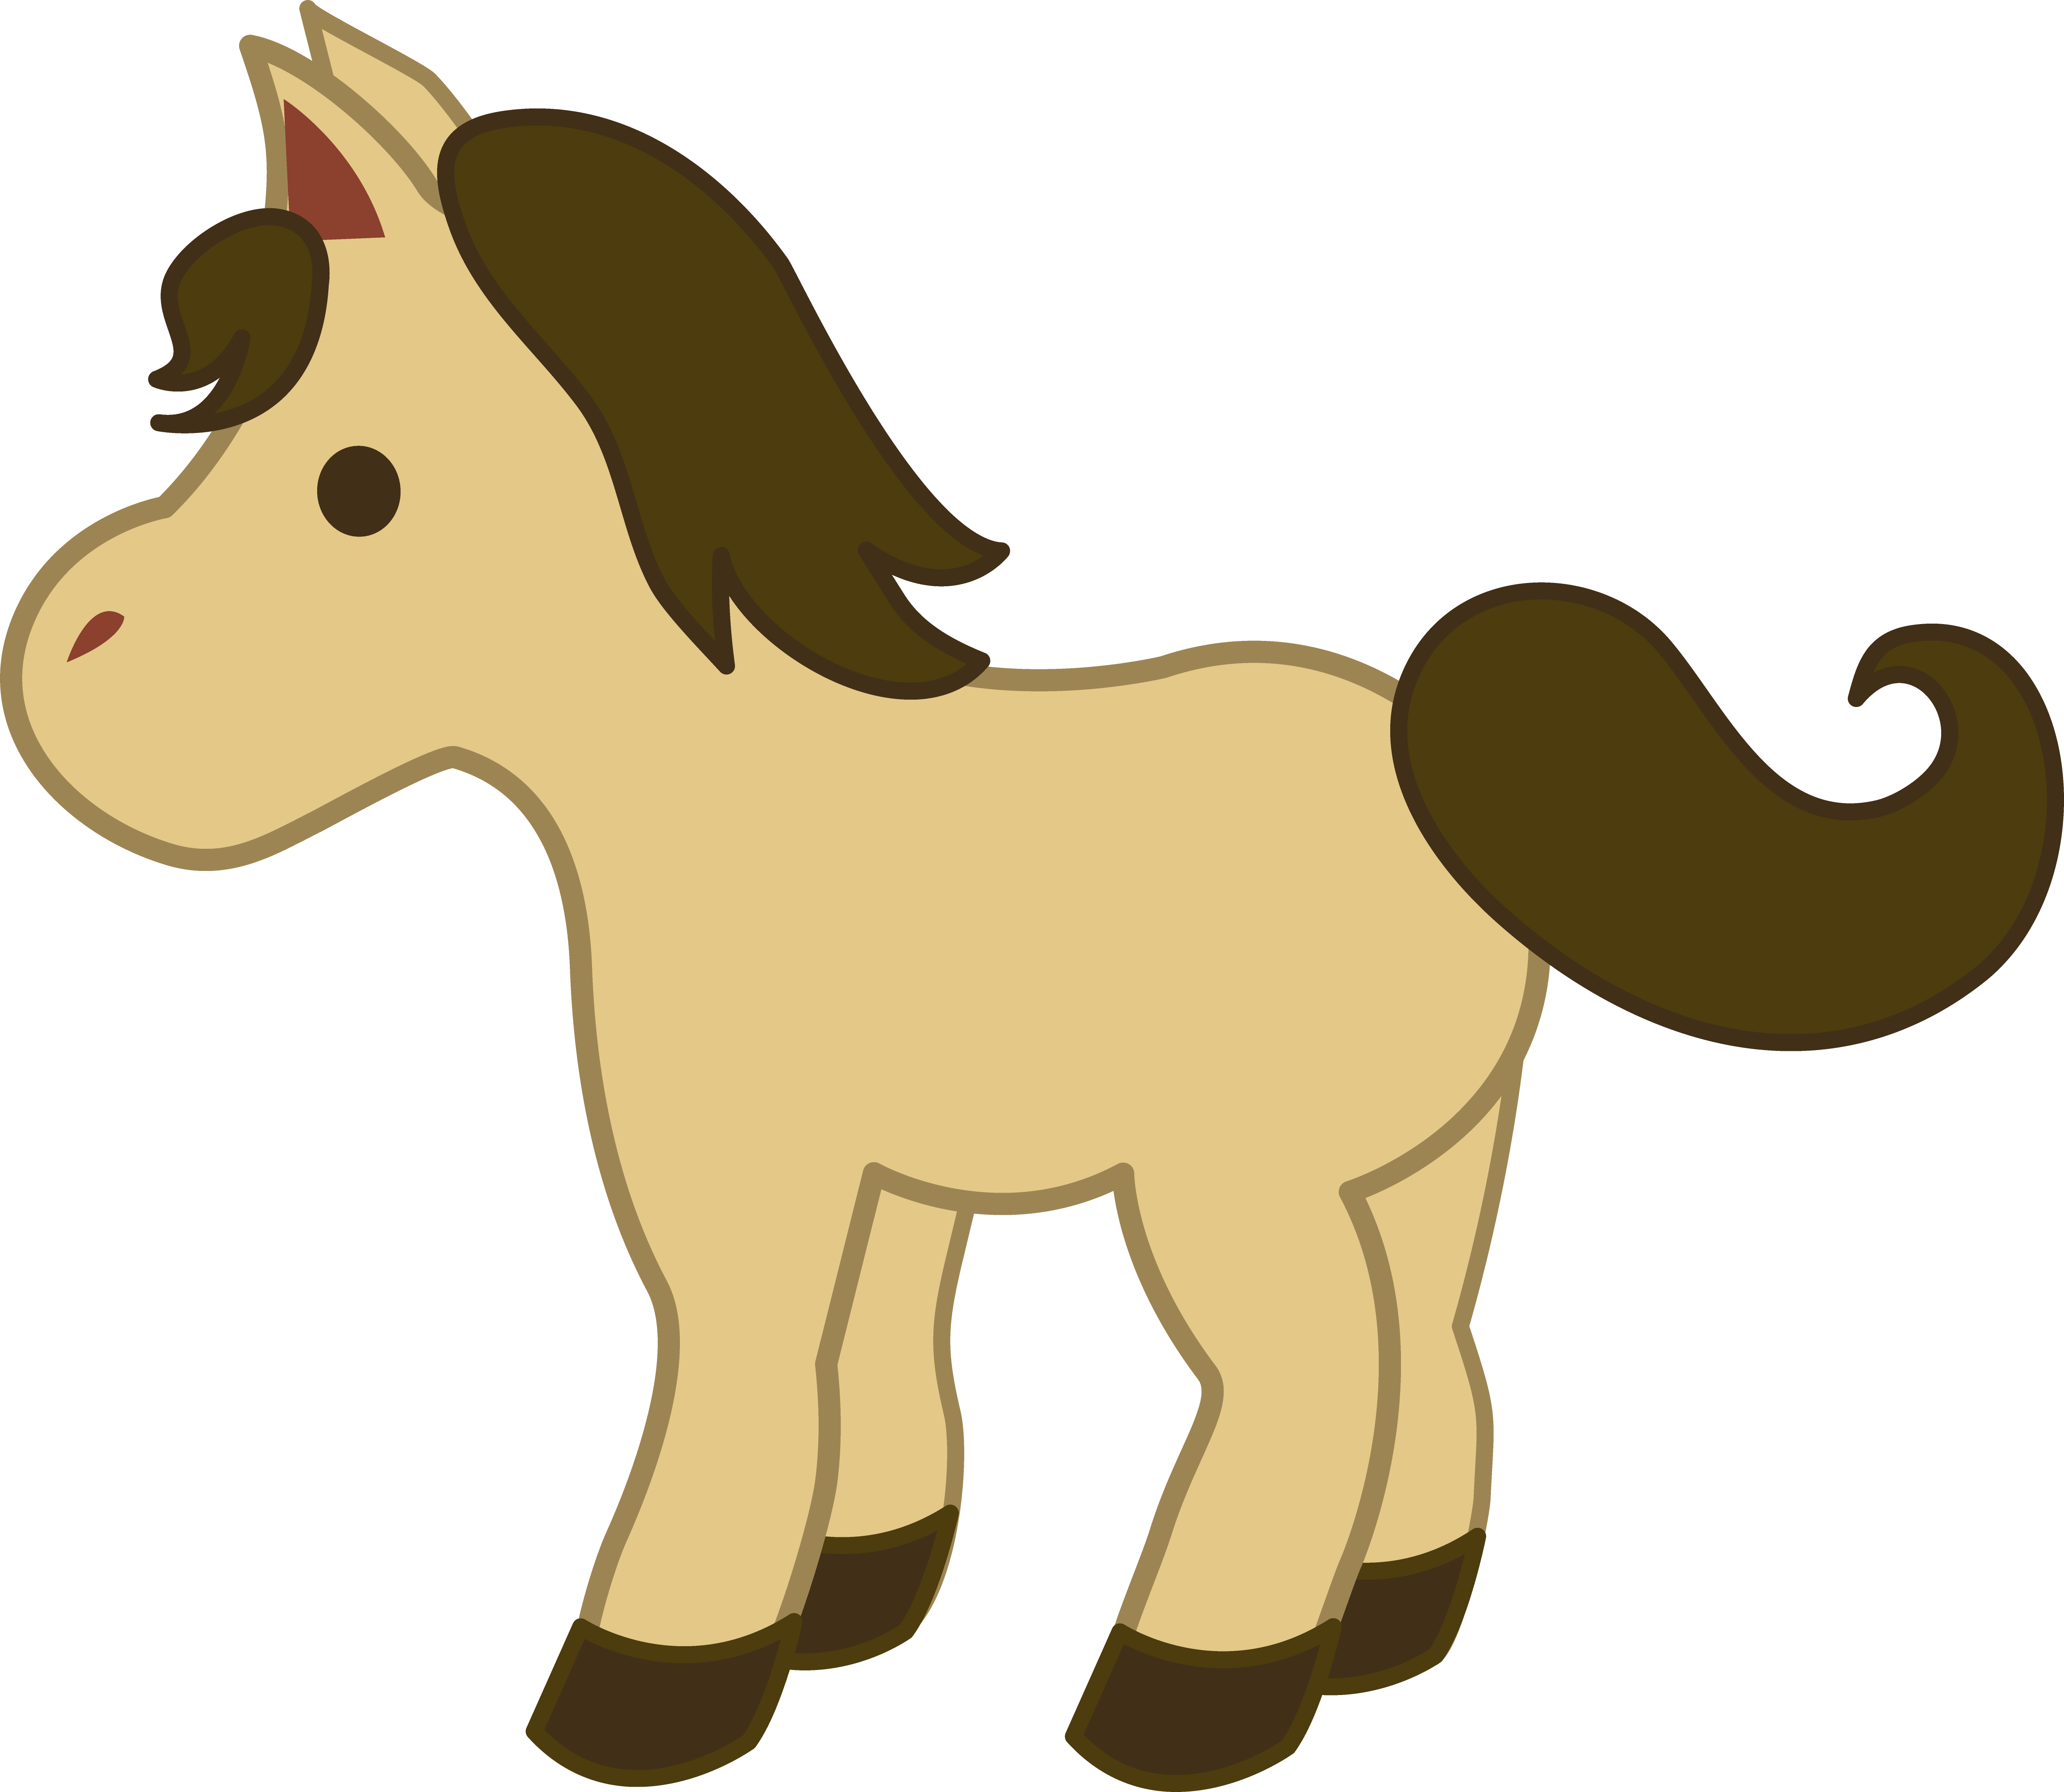 You can use this cartoon hors